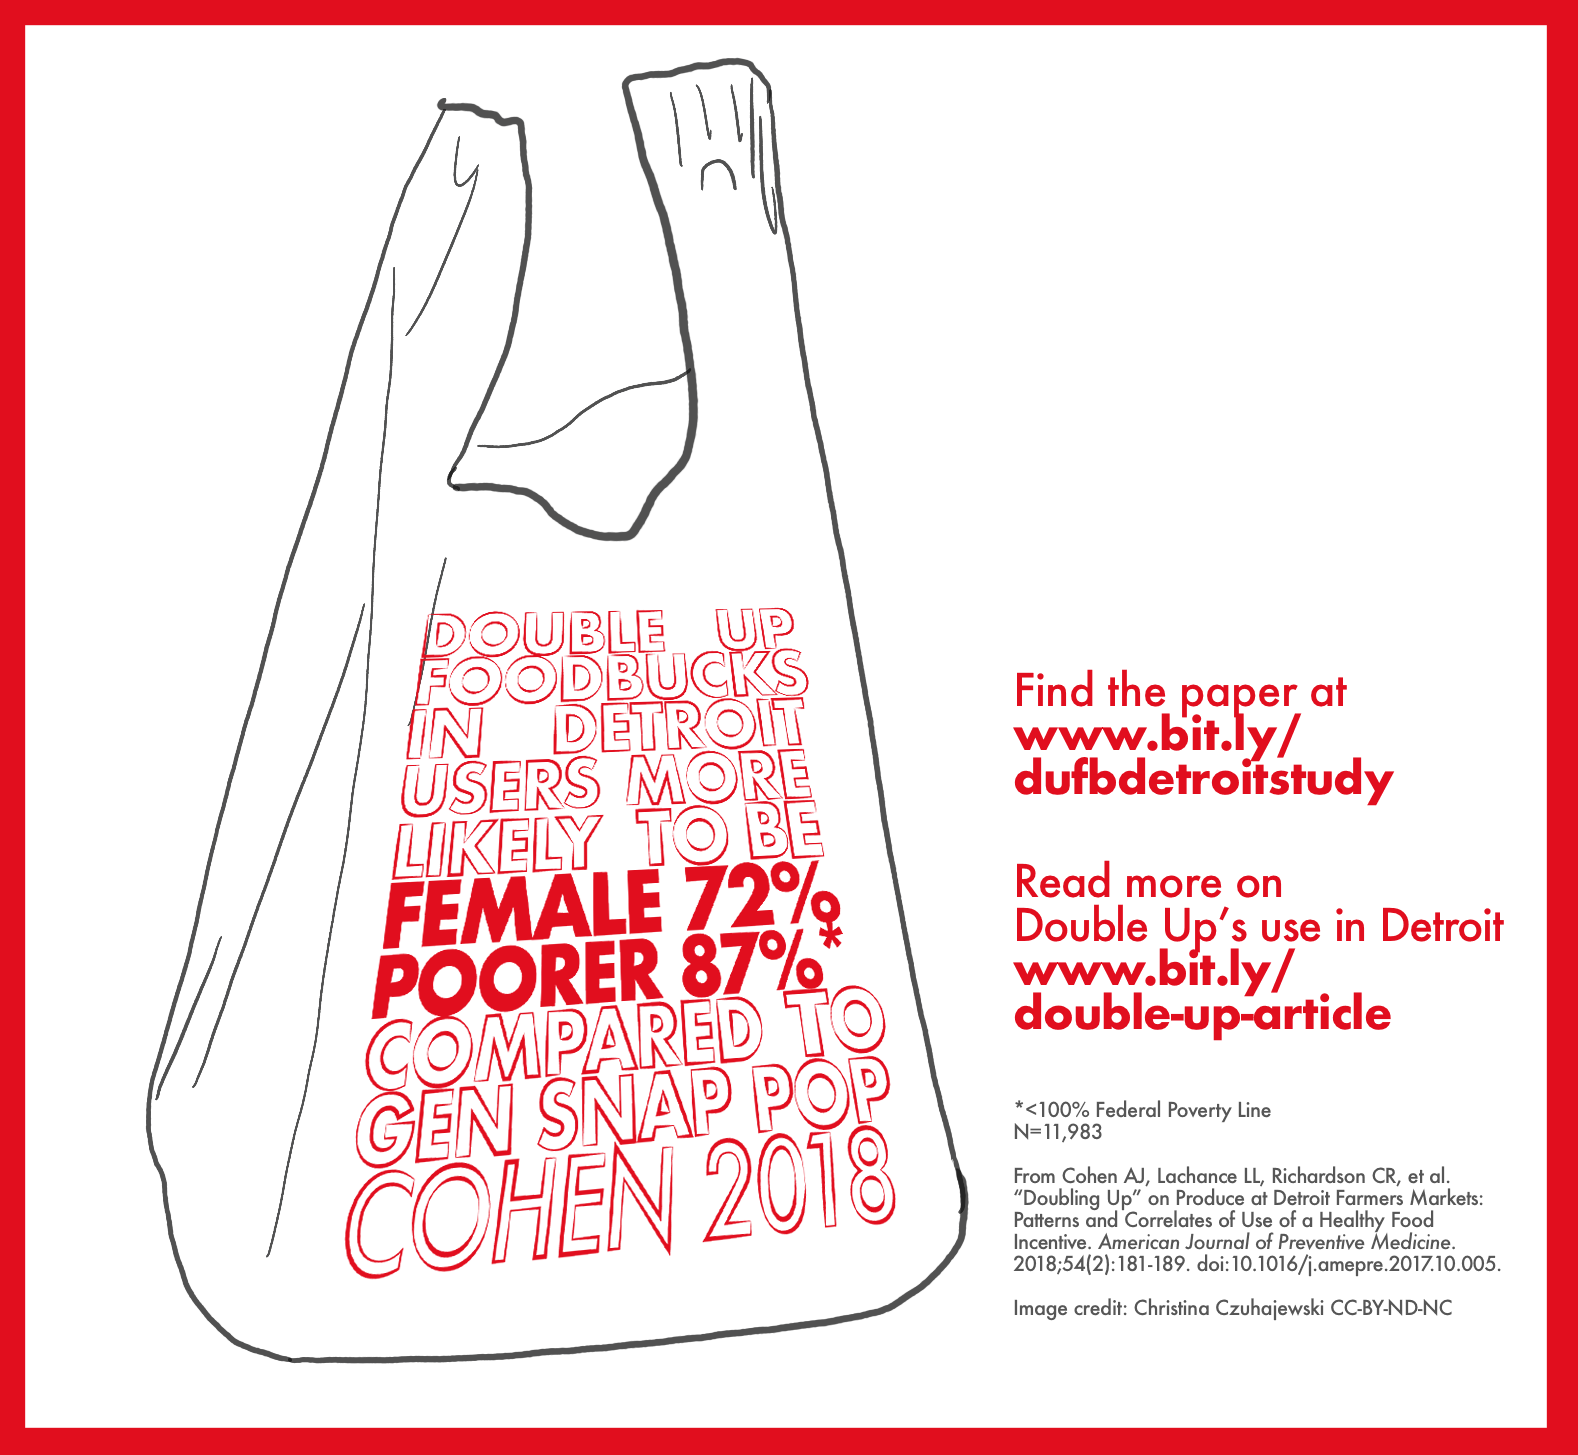 image of plastic bag with infographic text: double up fooducks in detroit users more likely to be female pooer compared to gen snap pop cohen 2018